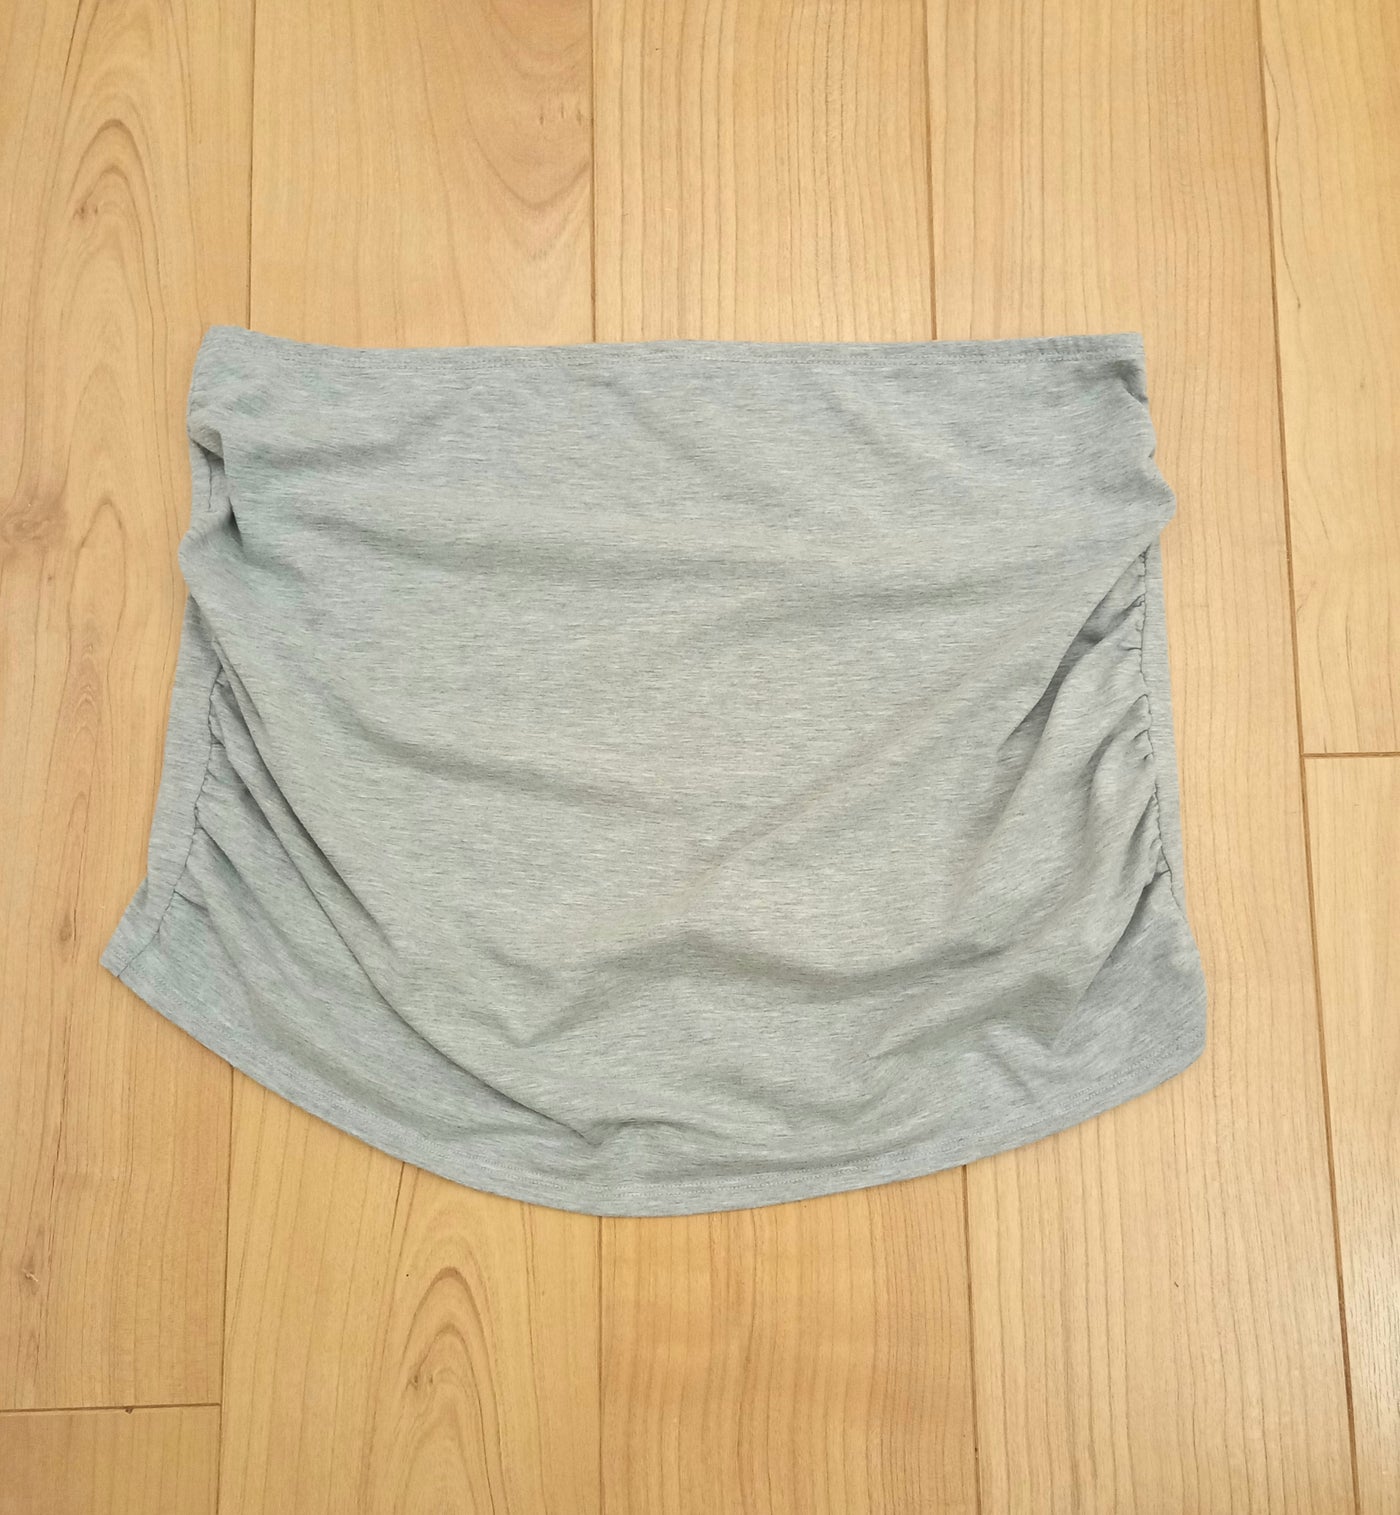 George Maternity Grey Bump Band - Size L (Approx UK 14/16)